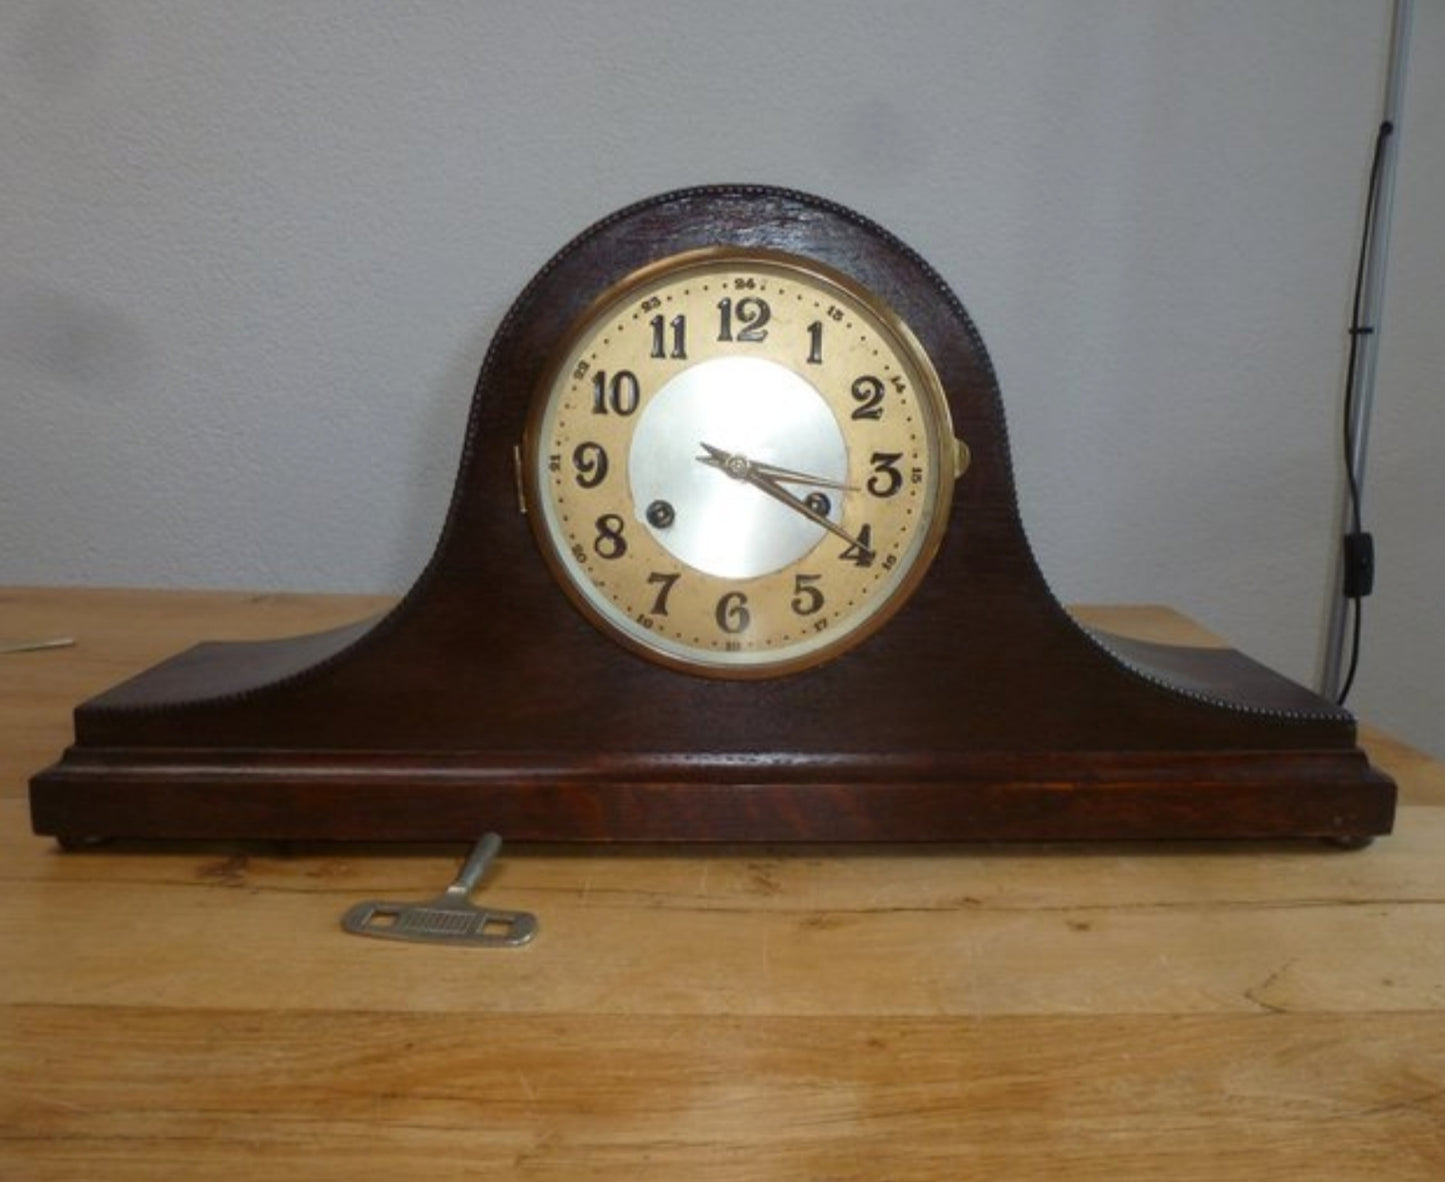 Urgos (Germany) 1930's Mantle Clock - Half Hour Chime w Key - Working Condition